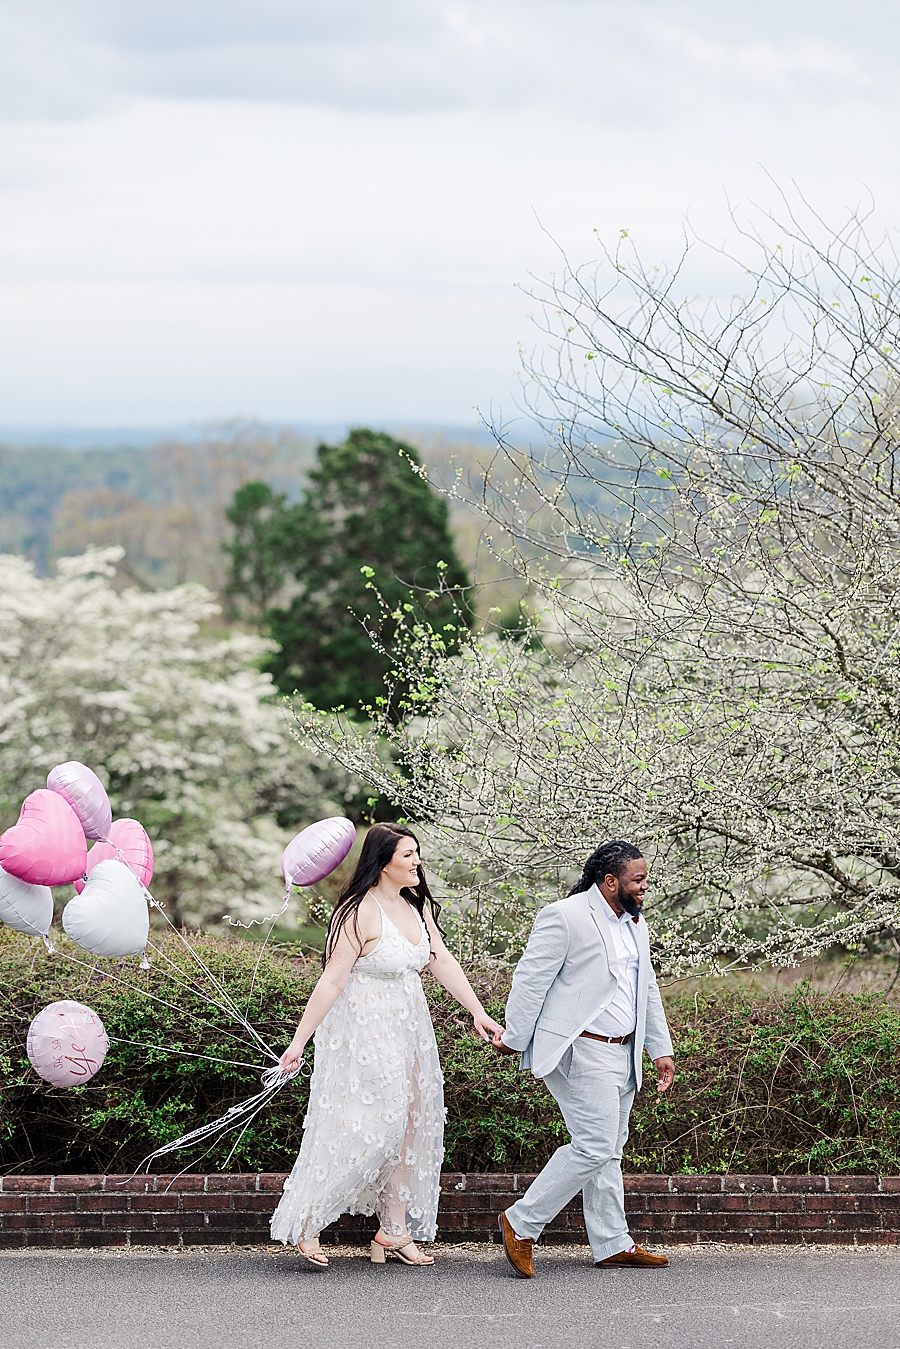 Walking with balloons at Garden Engagement Session by Amanda May Photos